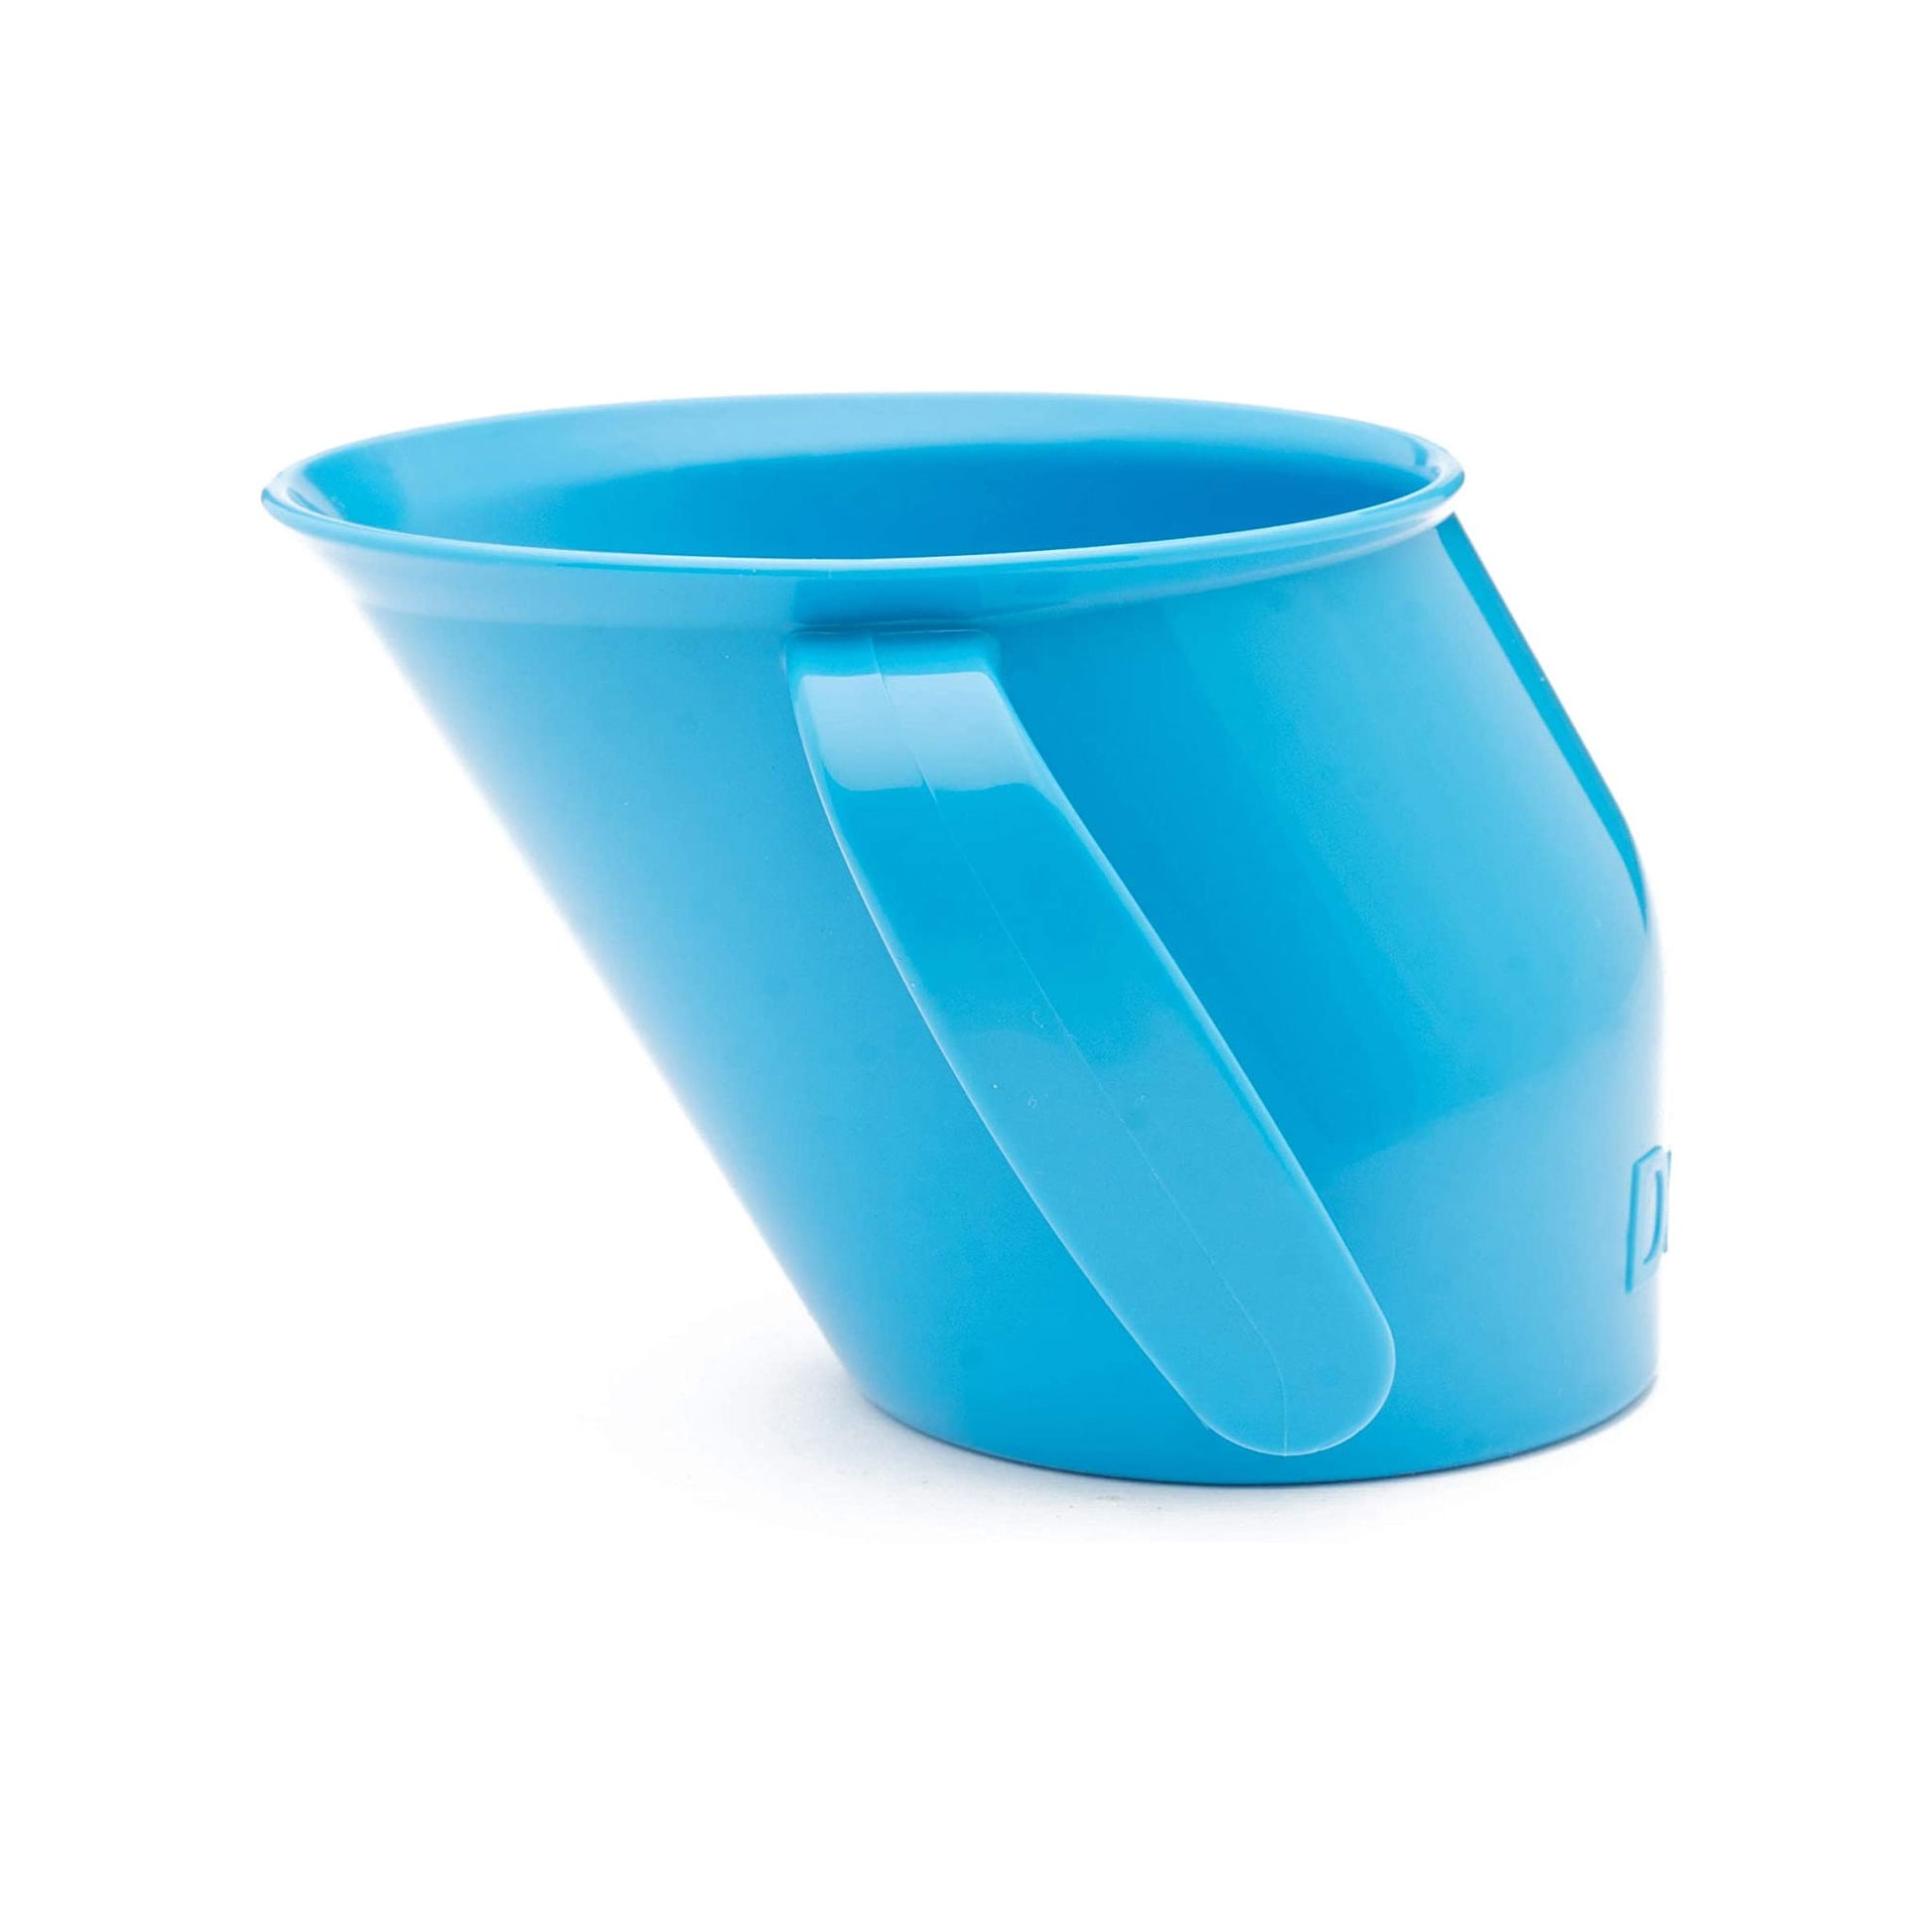 THE DOIDY CUP is the uniquely slanted open cup training to help infants during weaning.